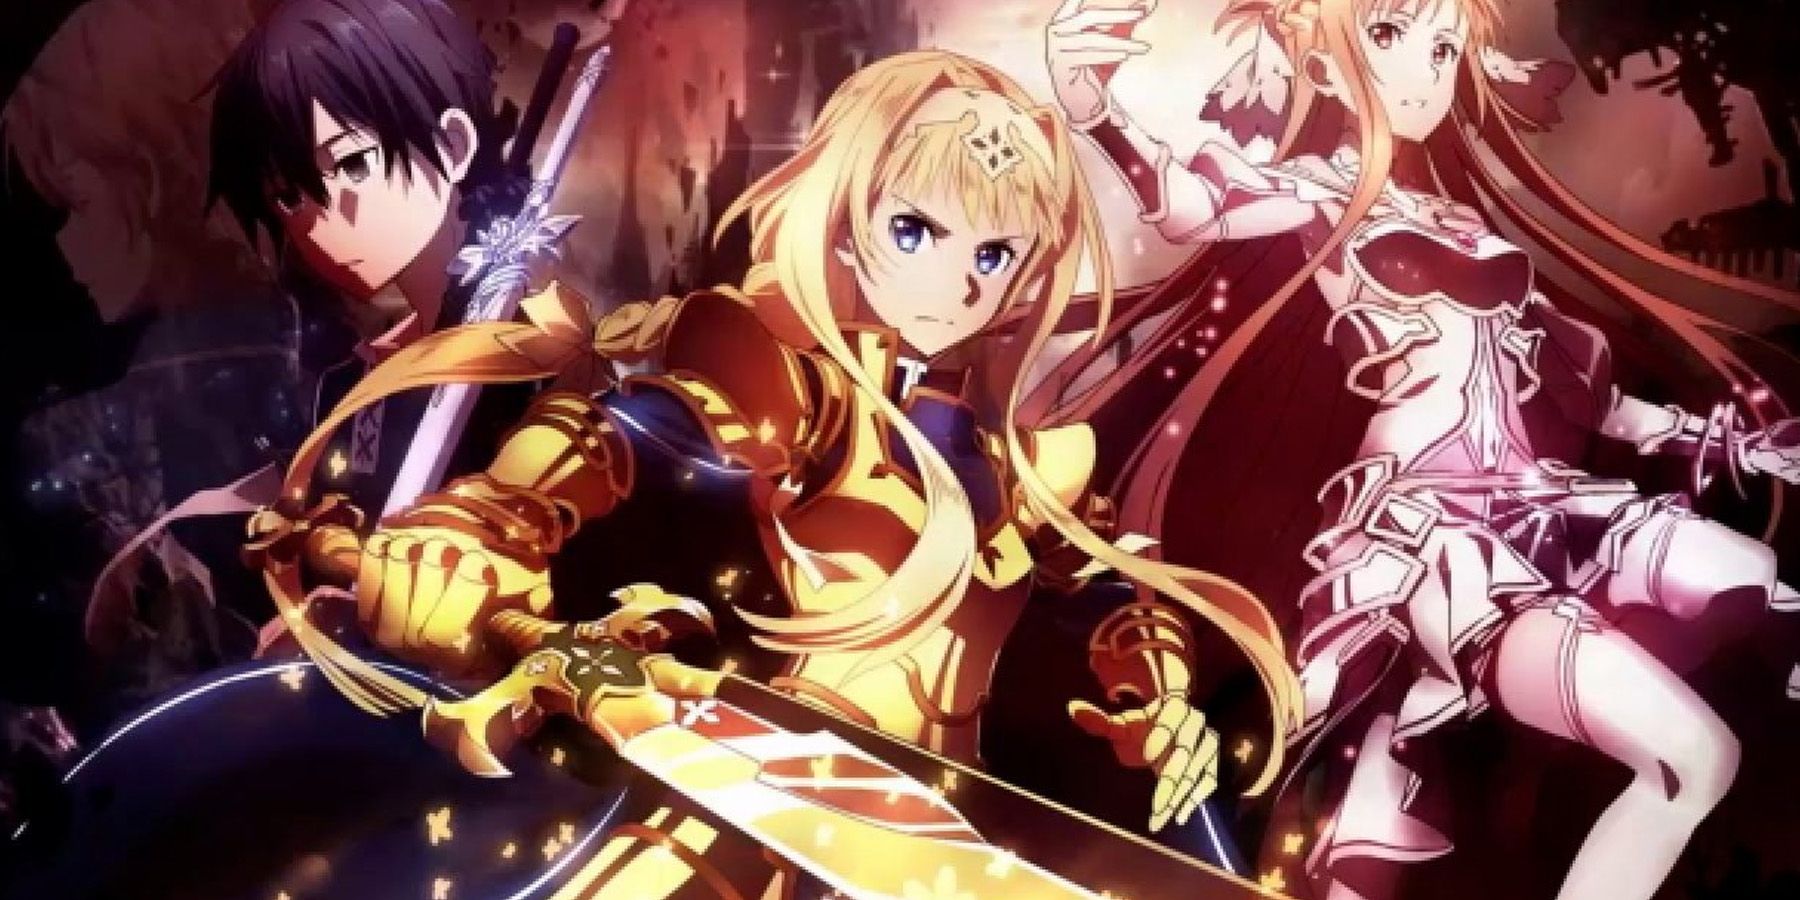 What’s Next For the Sword Art Online Anime?